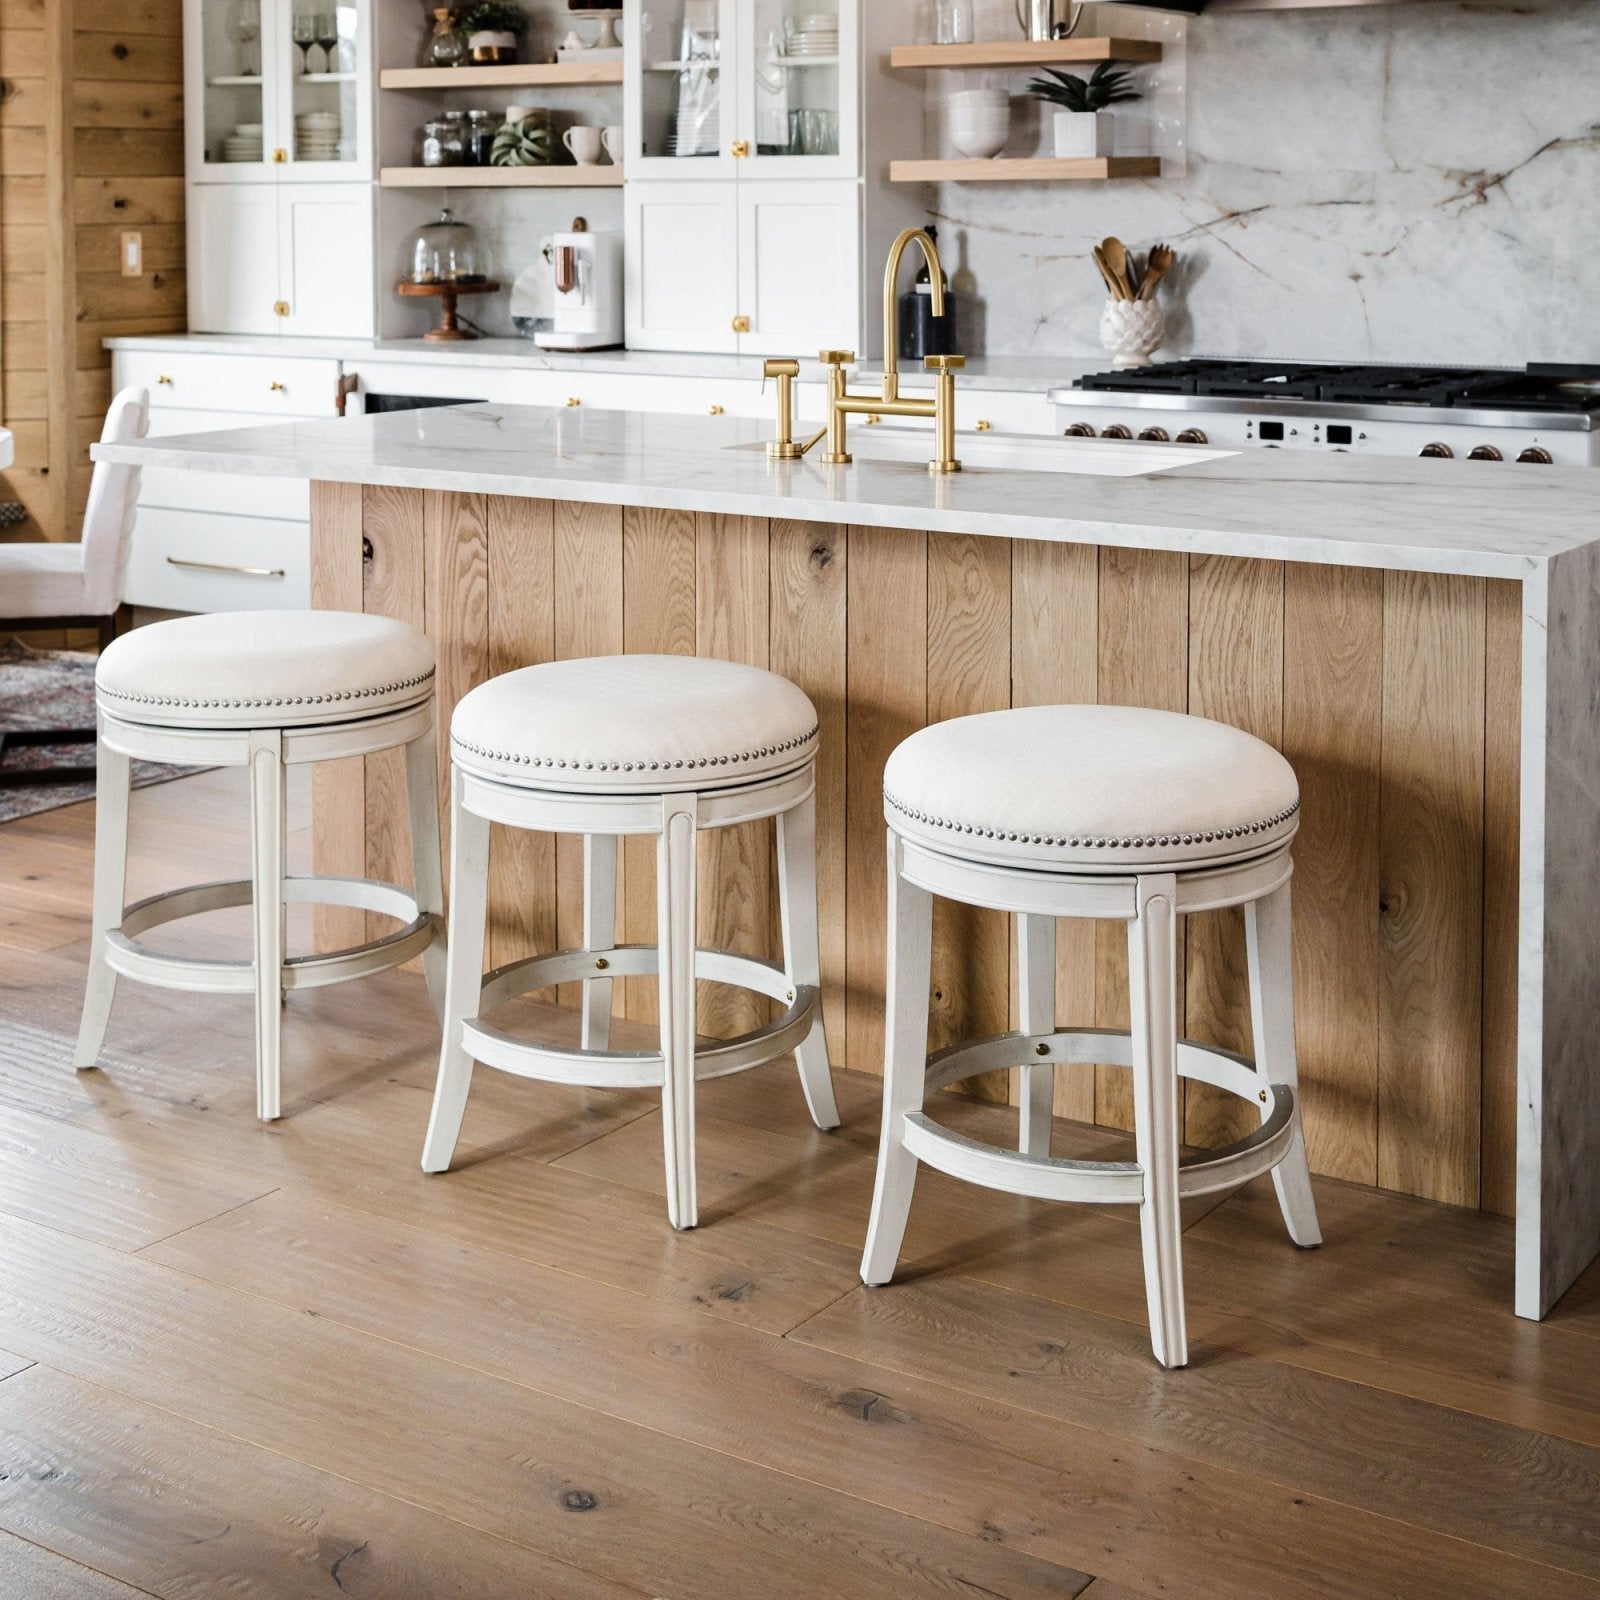 Alexander Backless Bar Stool in White Oak Finish with Natural Color Fabric Upholstery in Stools by Maven Lane